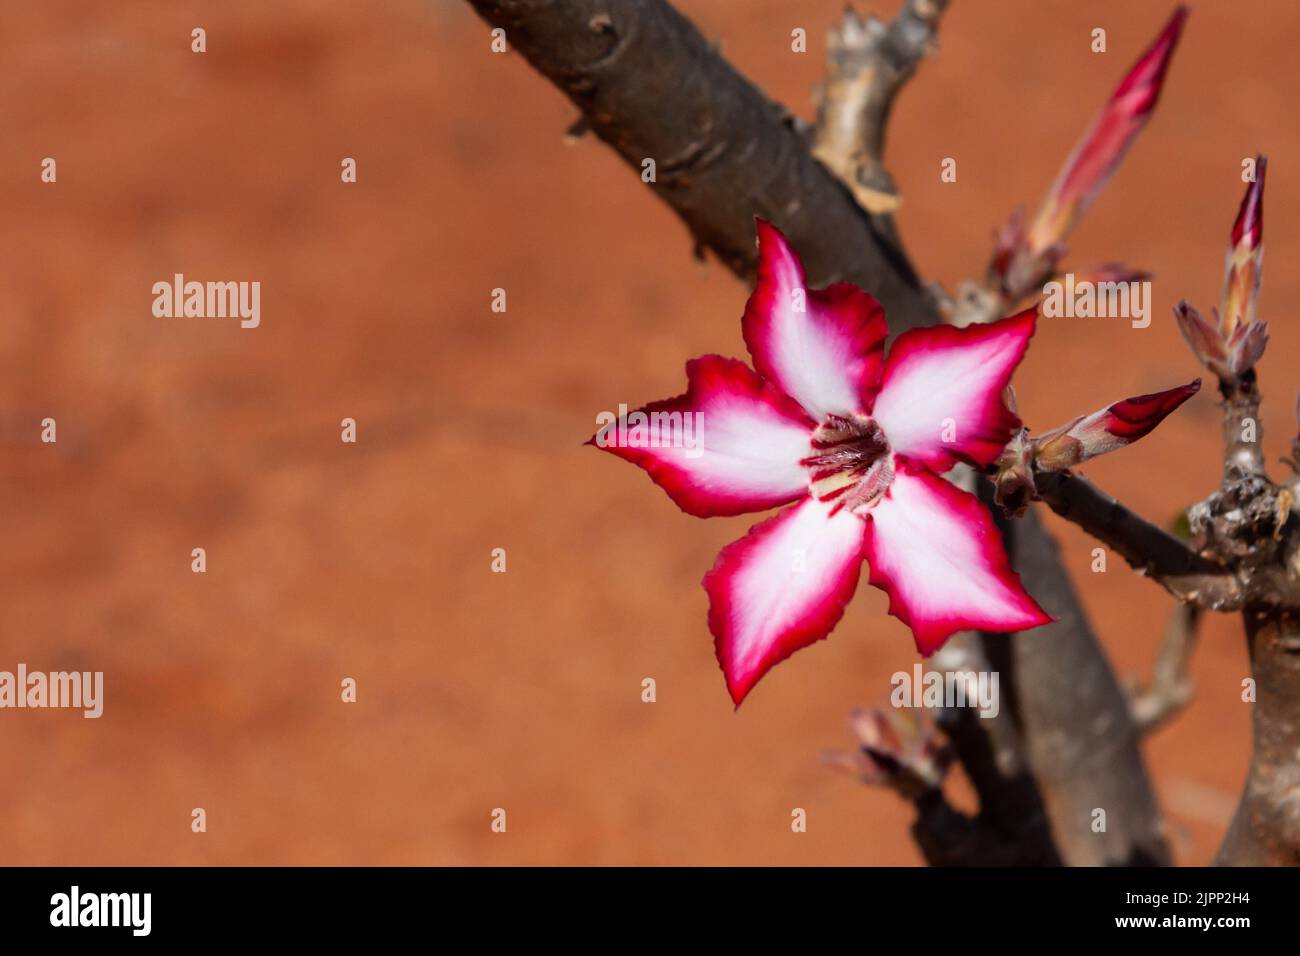 Impala Lily flower (Adenium multiflorum) in South Africa closeup with blurred background and copy space Stock Photo